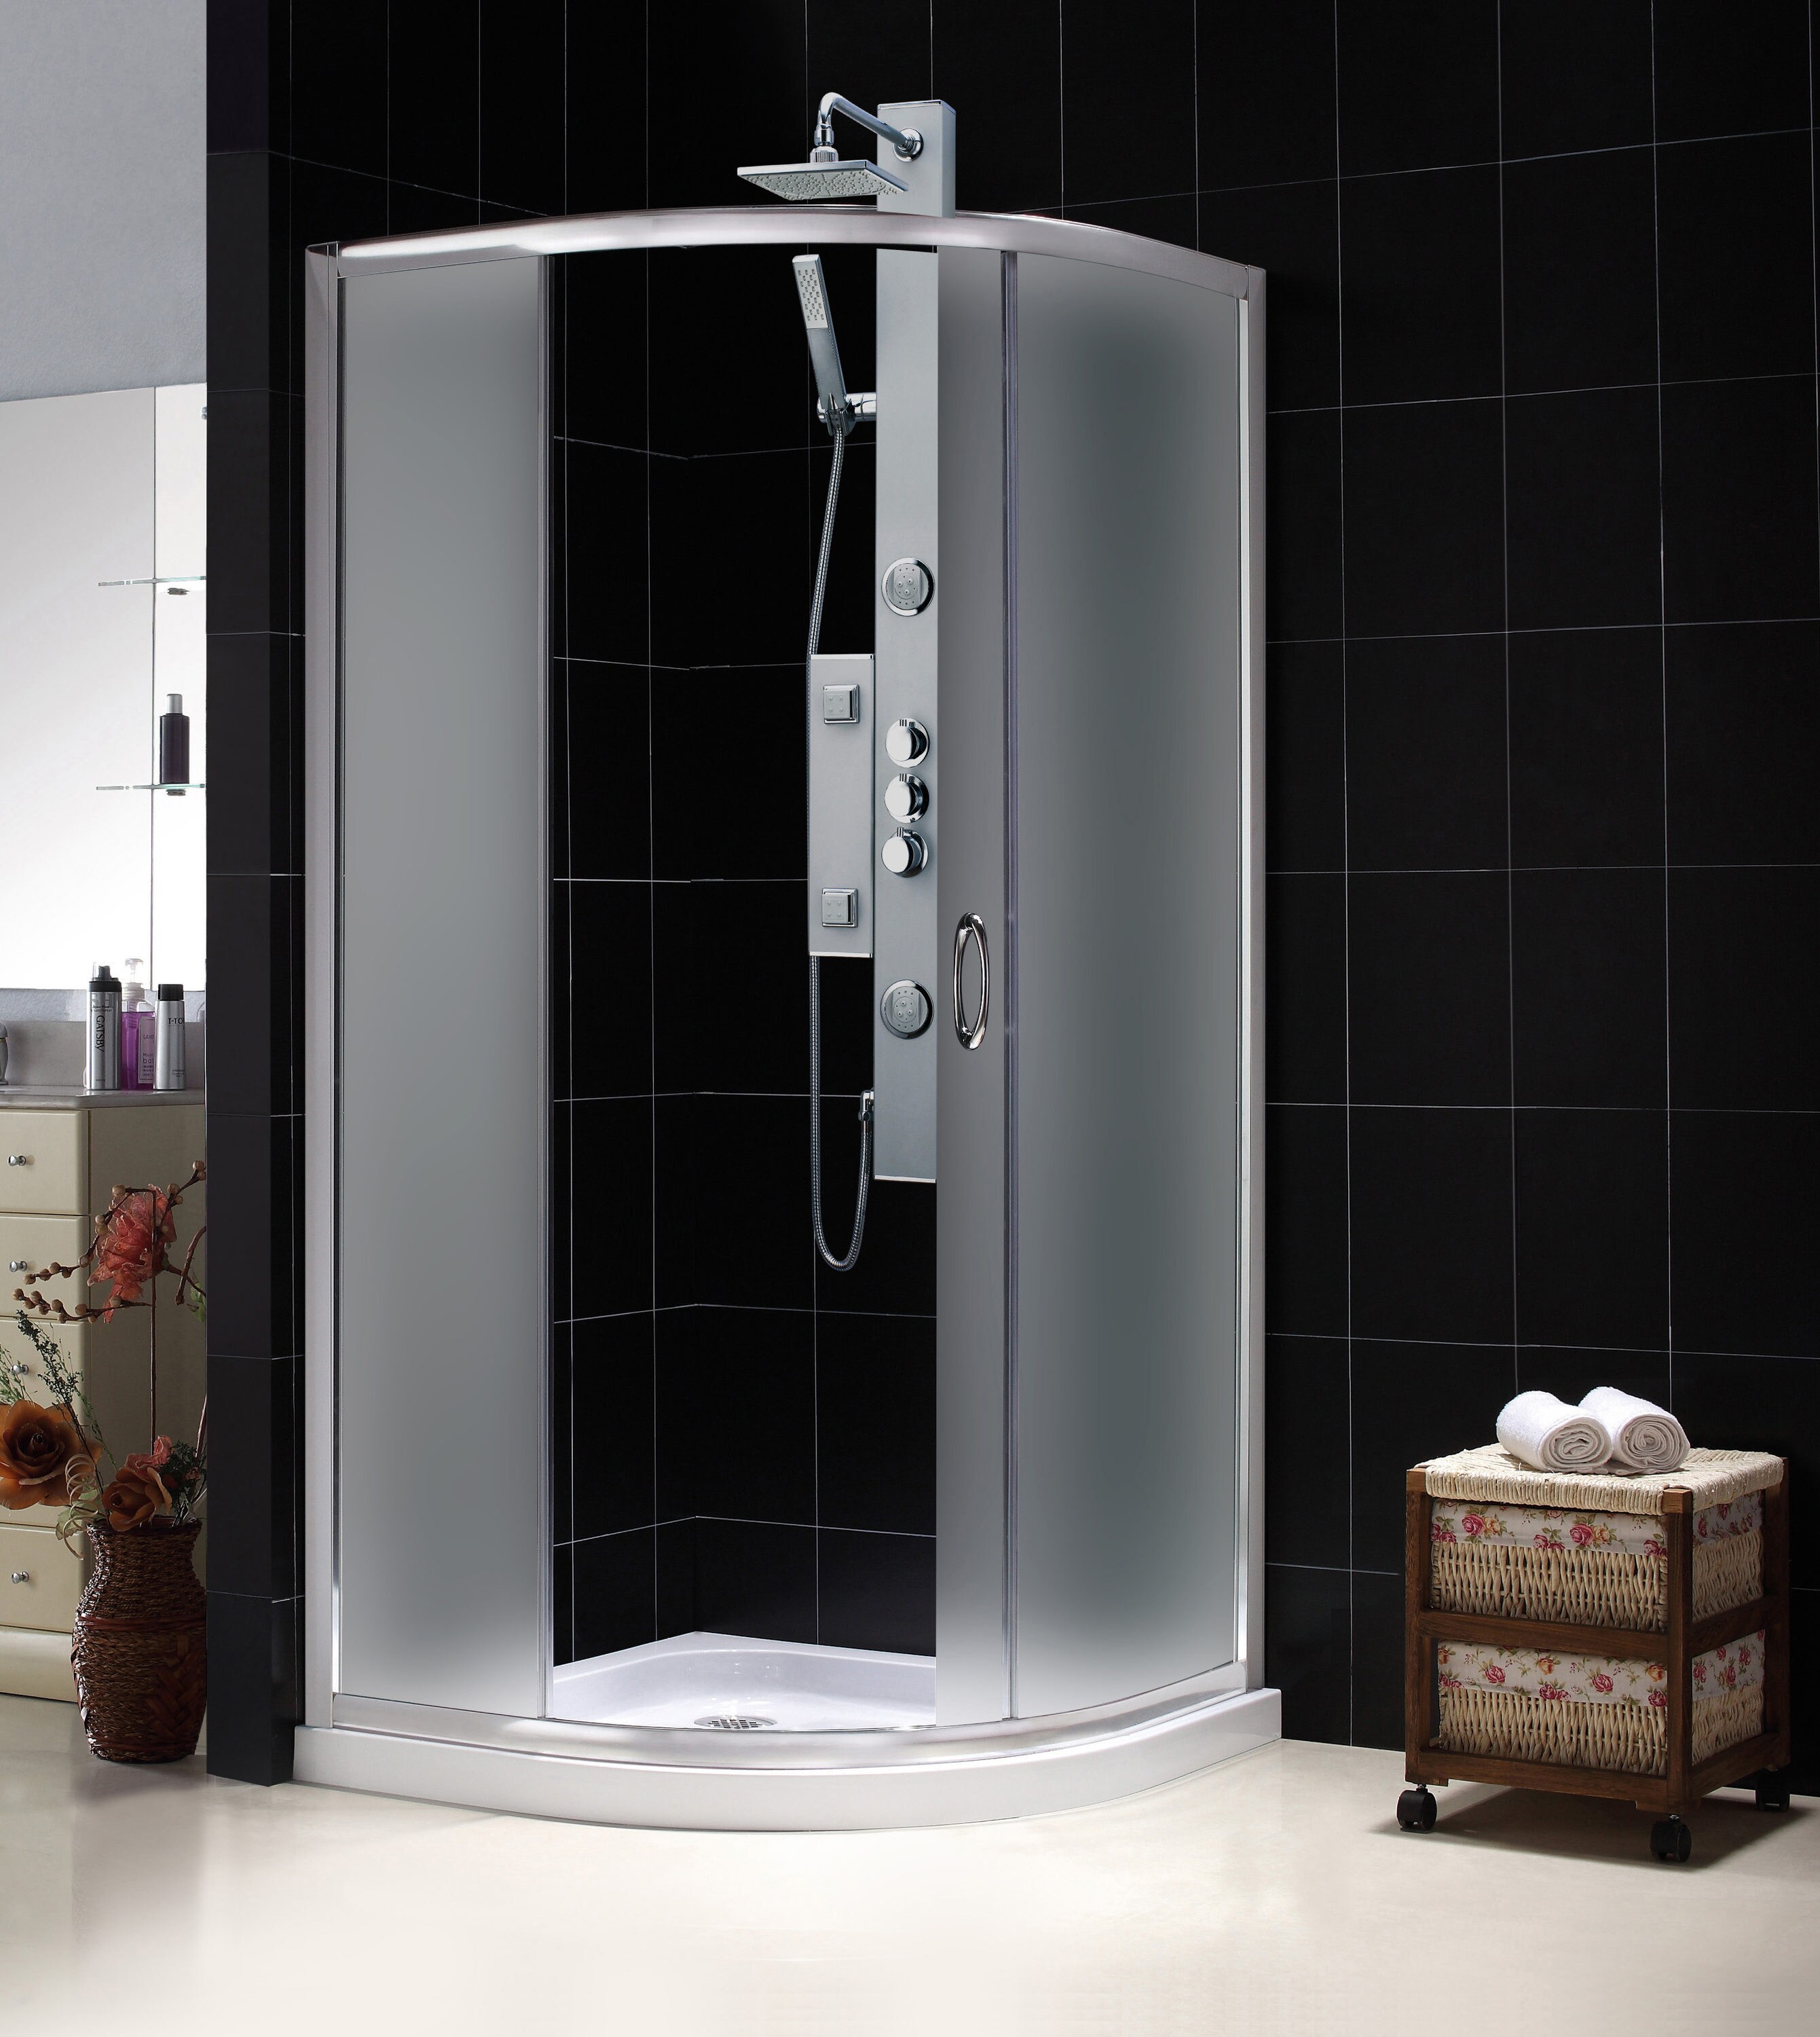 DreamLine Hydrotherapy Shower Panel with Shower Accessory Holder - Dreamline